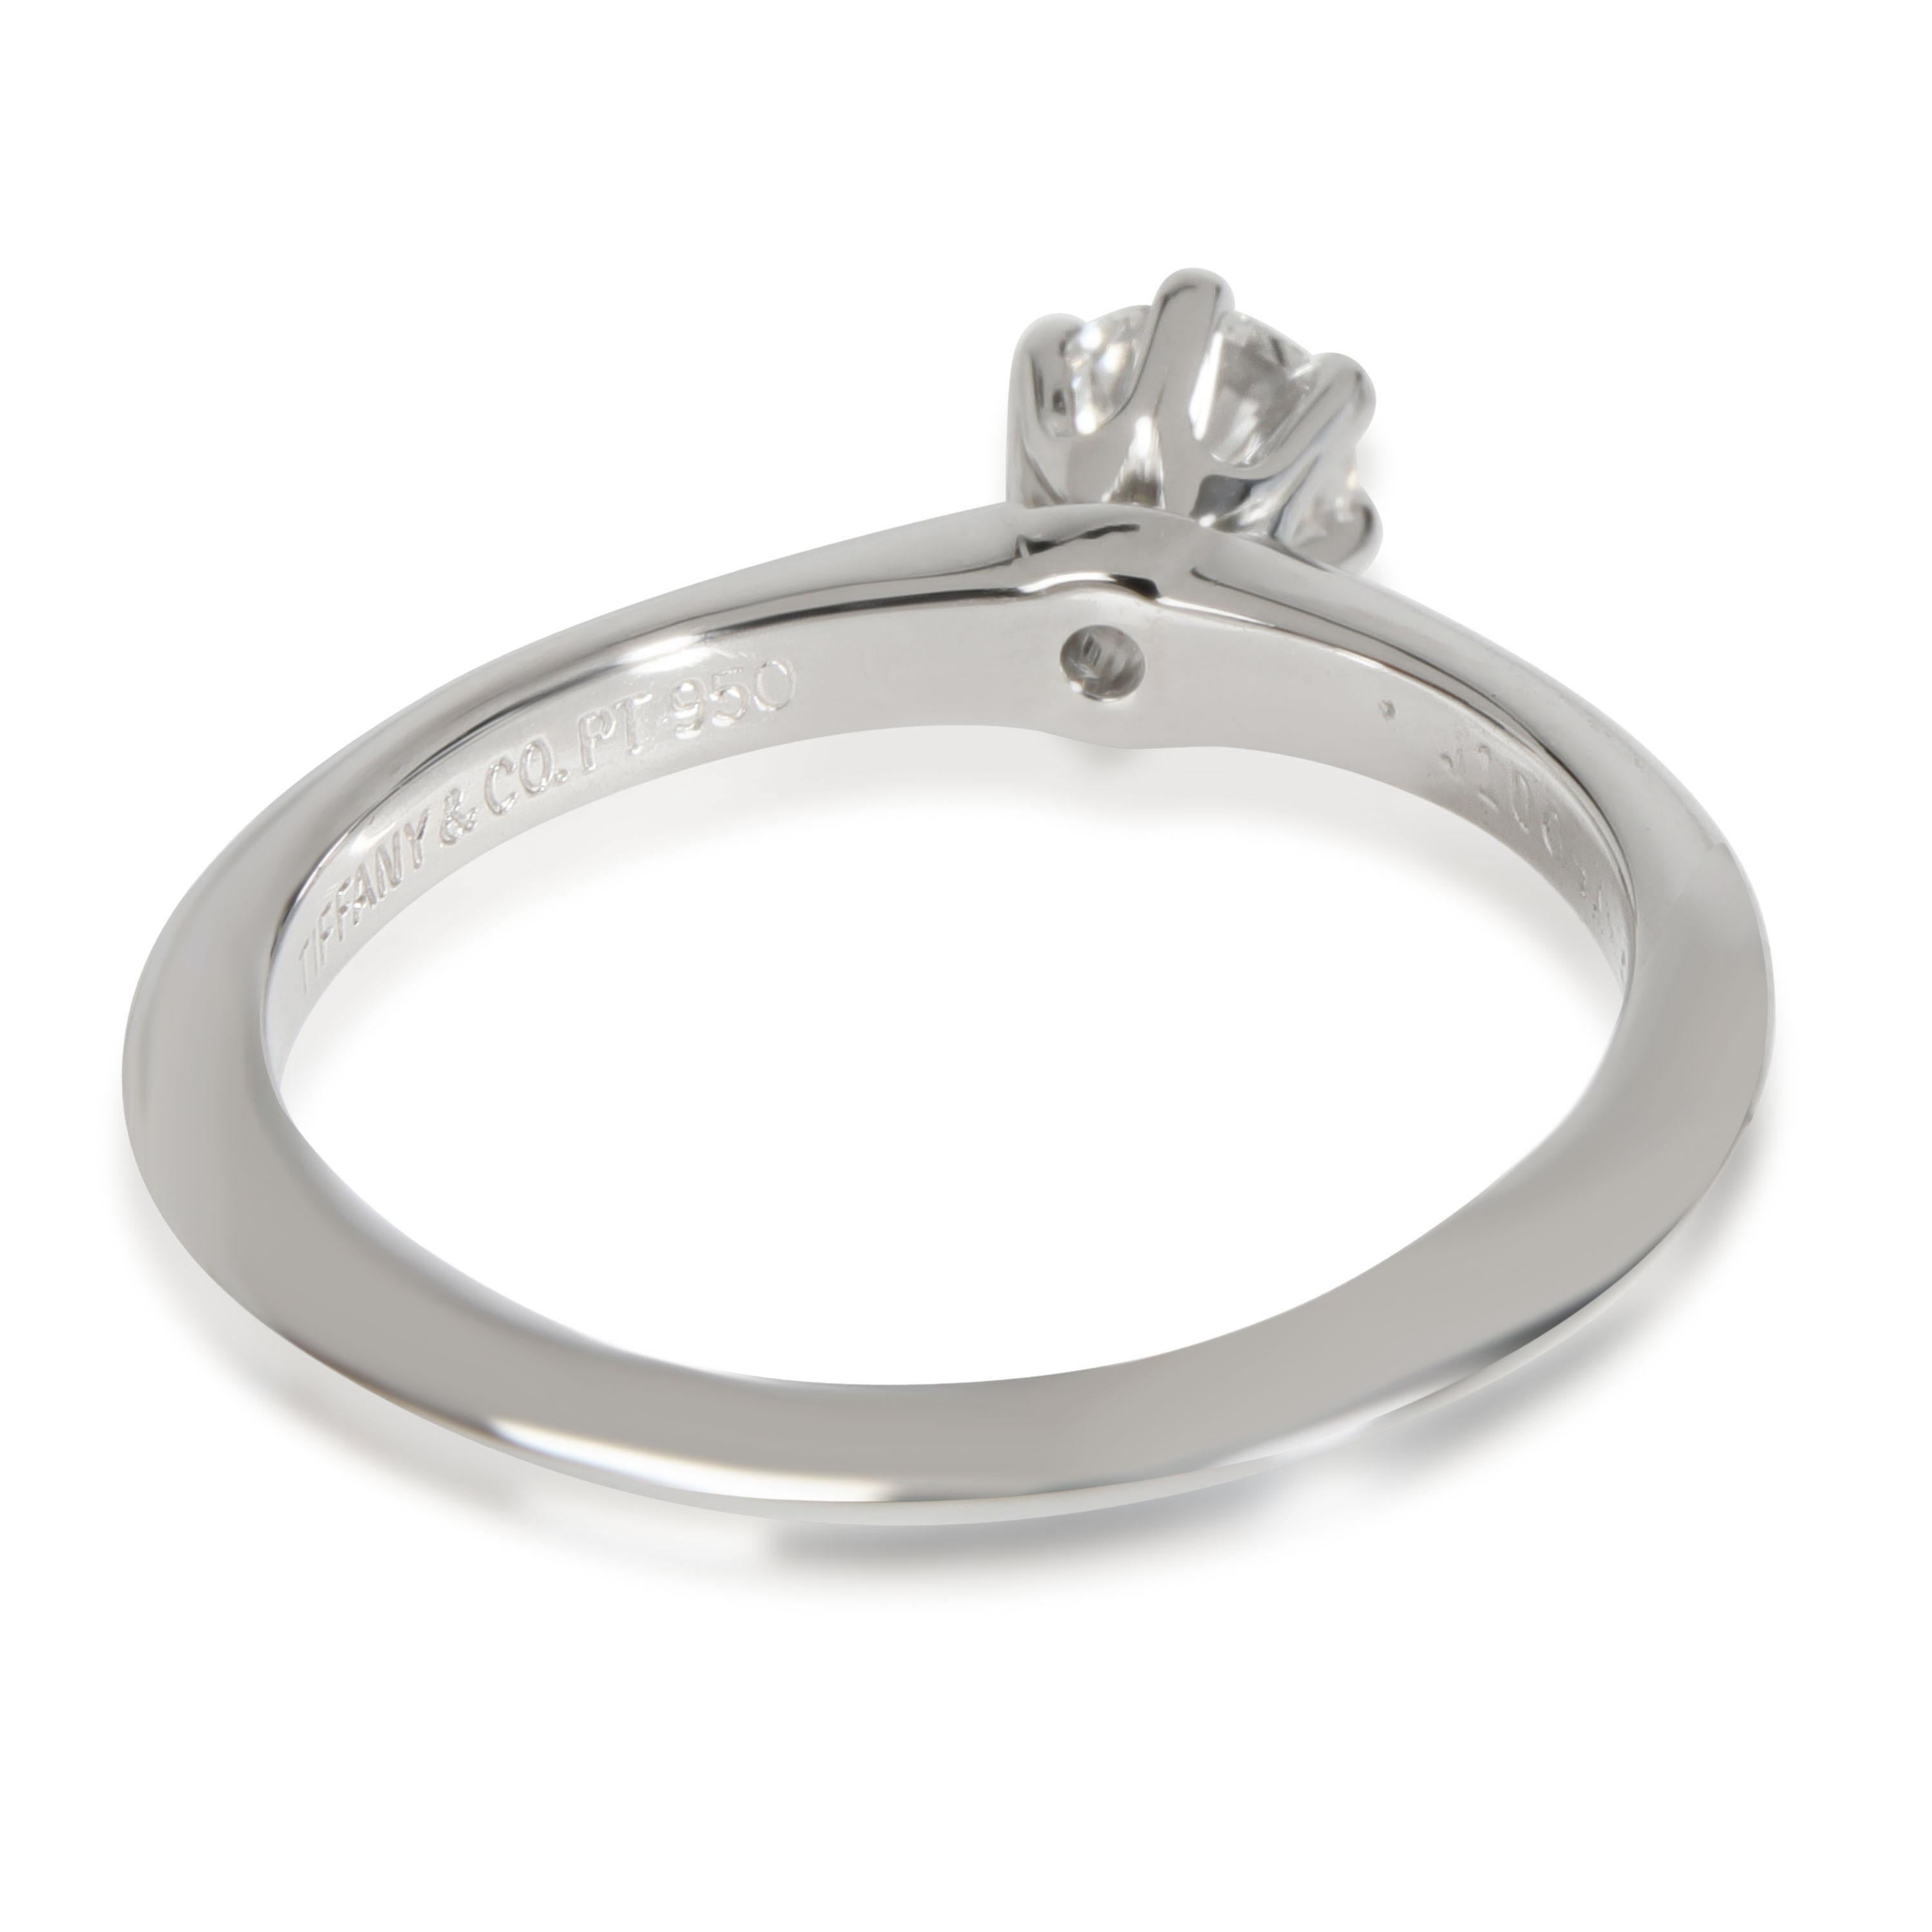 Tiffany & Co. Diamond Solitaire Engagement Ring in Platinum E VS1 0.24 CTW

PRIMARY DETAILS
SKU: 112752
Listing Title: Tiffany & Co. Diamond Solitaire Engagement Ring in Platinum E VS1 0.24 CTW
Condition Description: Retails for 2340 USD. In